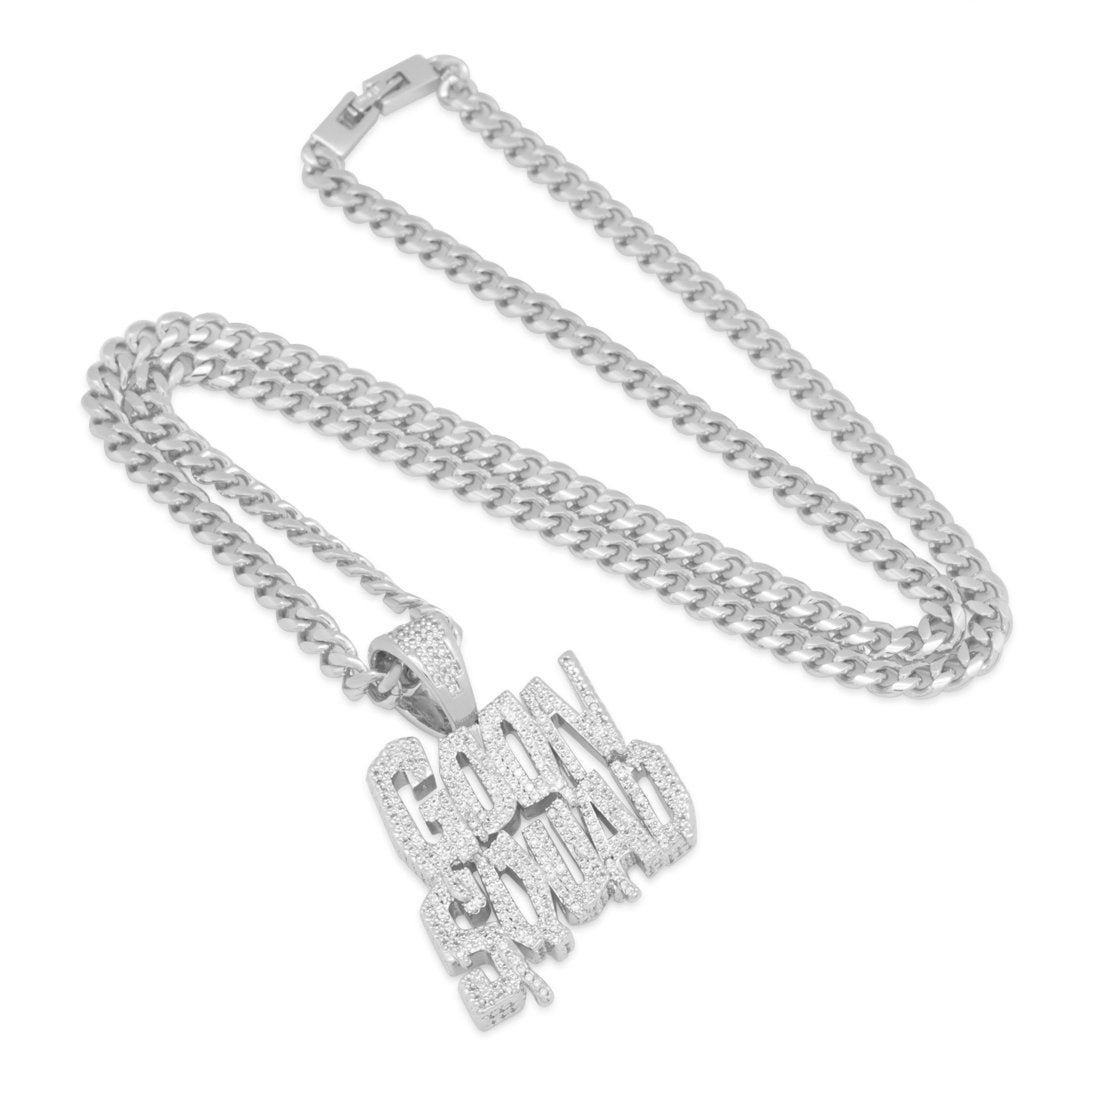 Space Jam x King Ice - Goon Squad Necklace